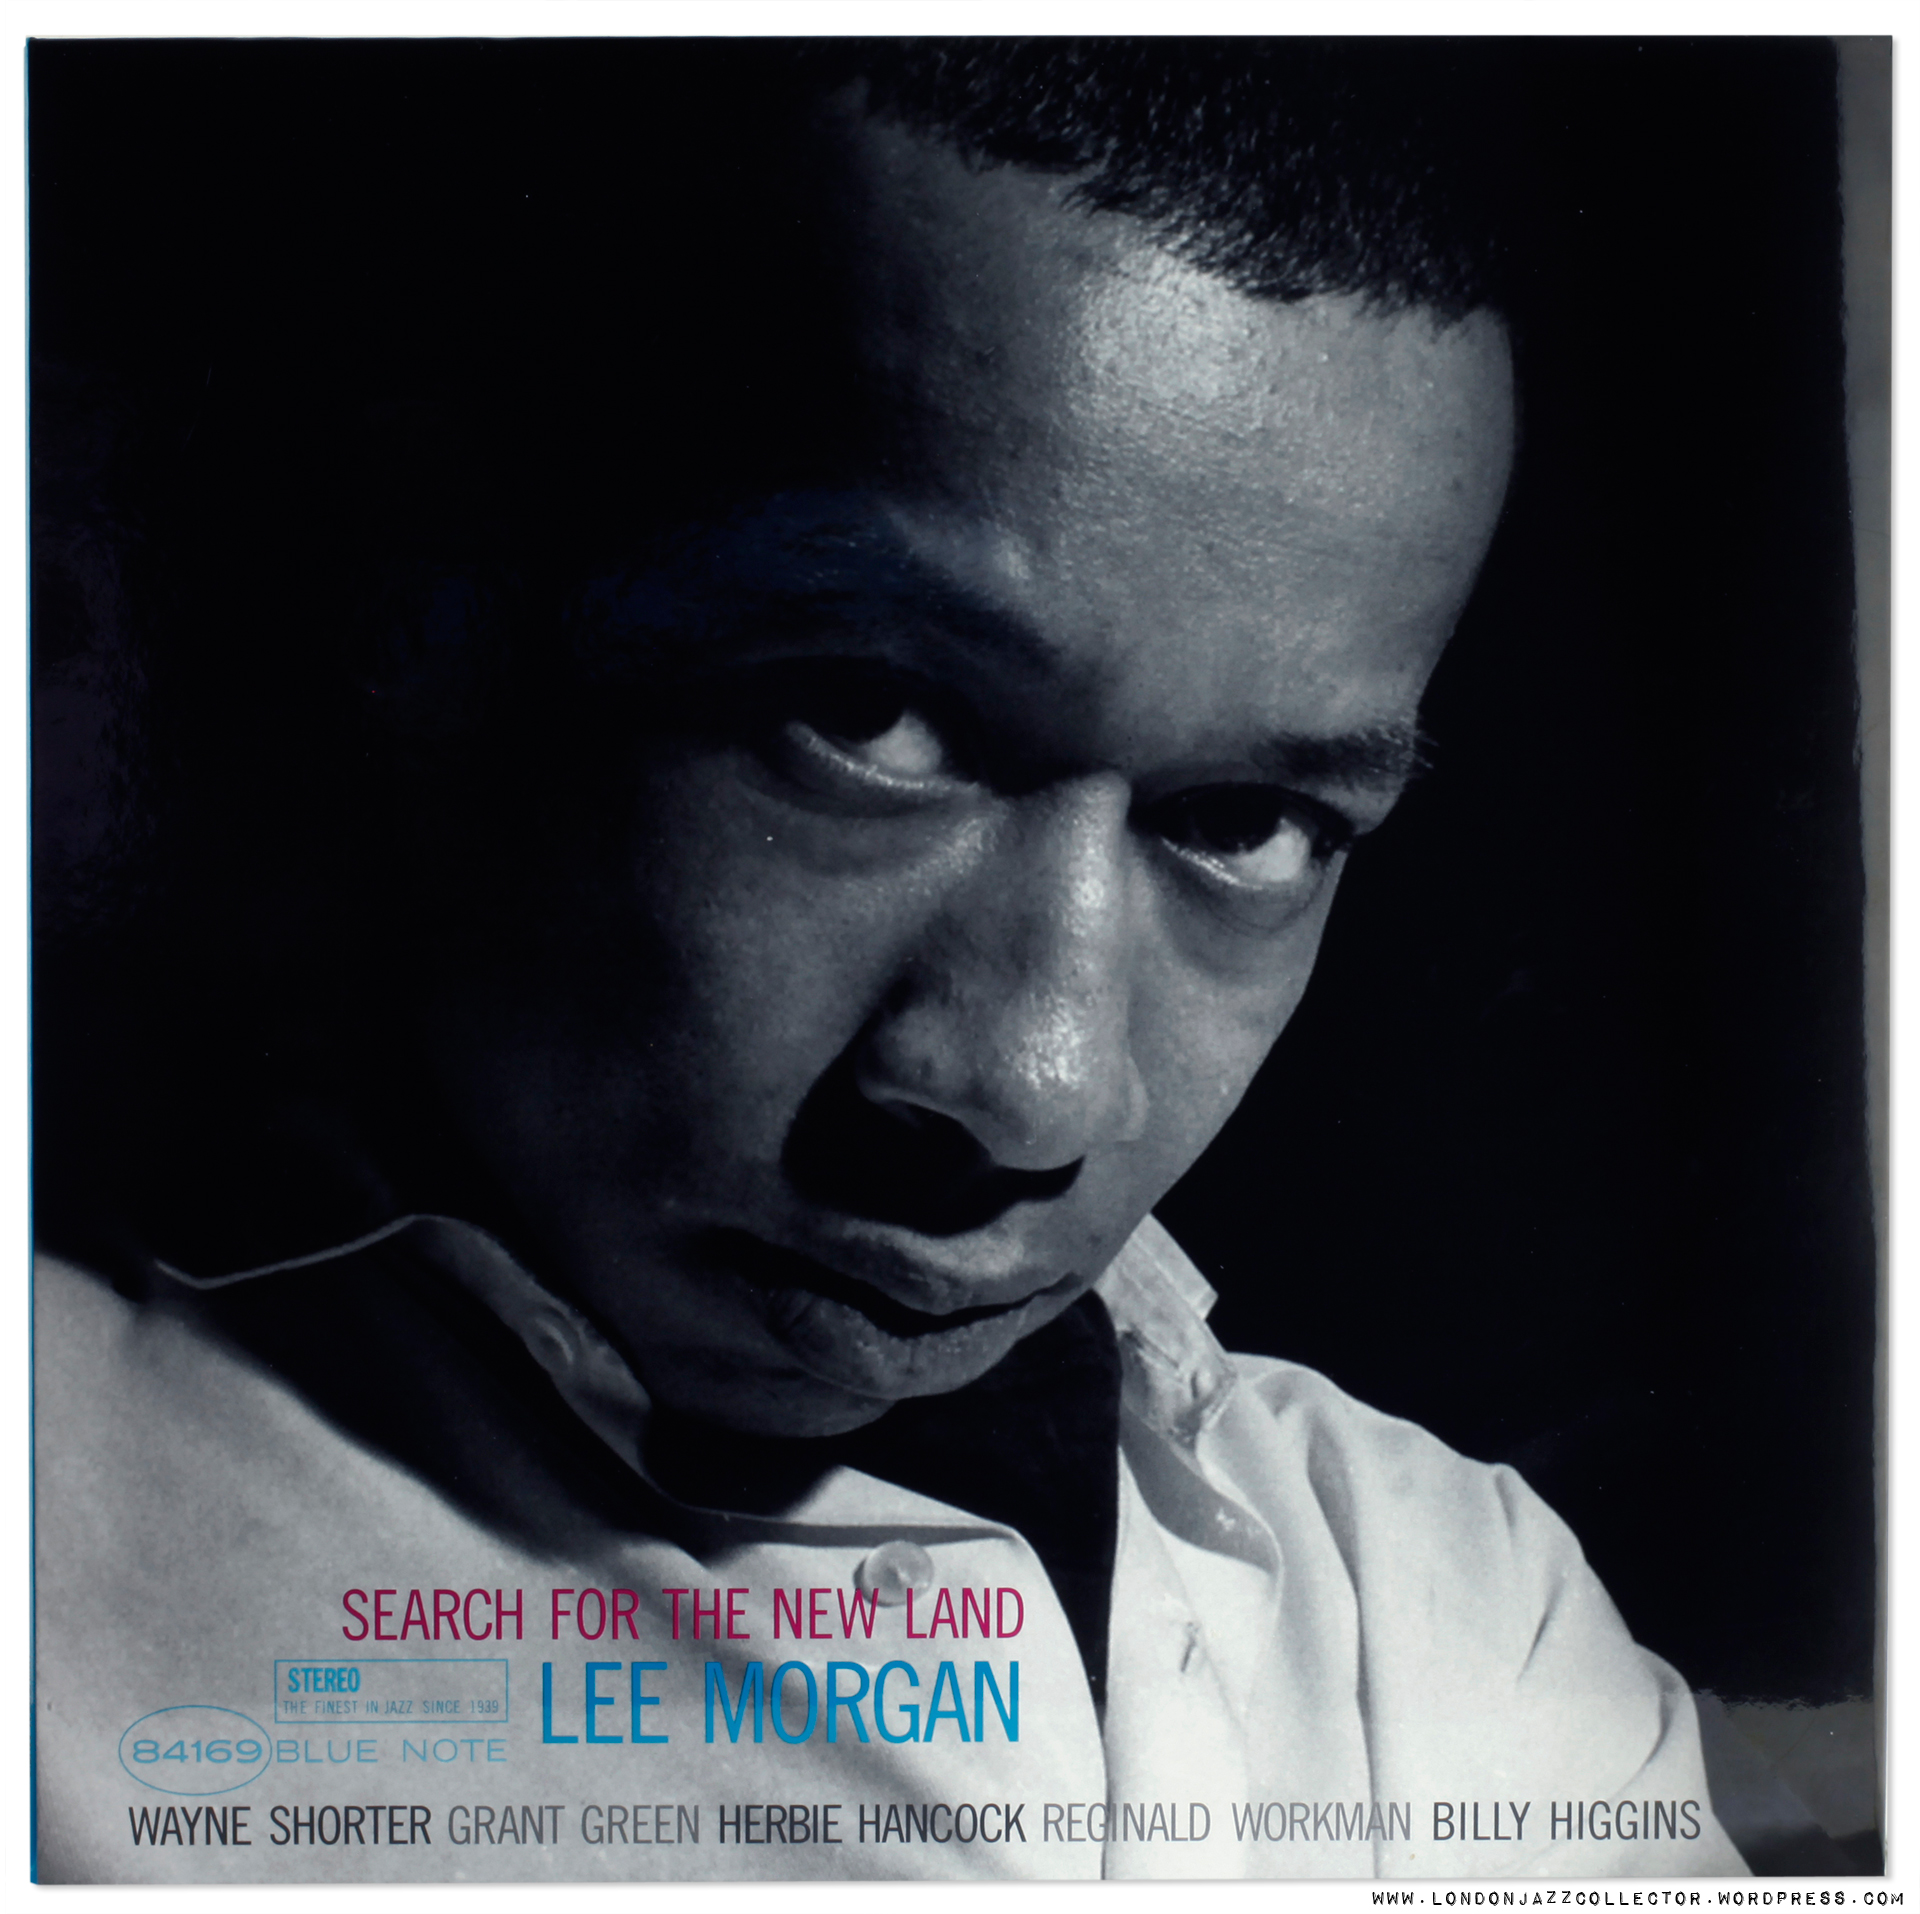 Lee Morgan: In Search Of The New Land (1964) Blue Note/ MM33